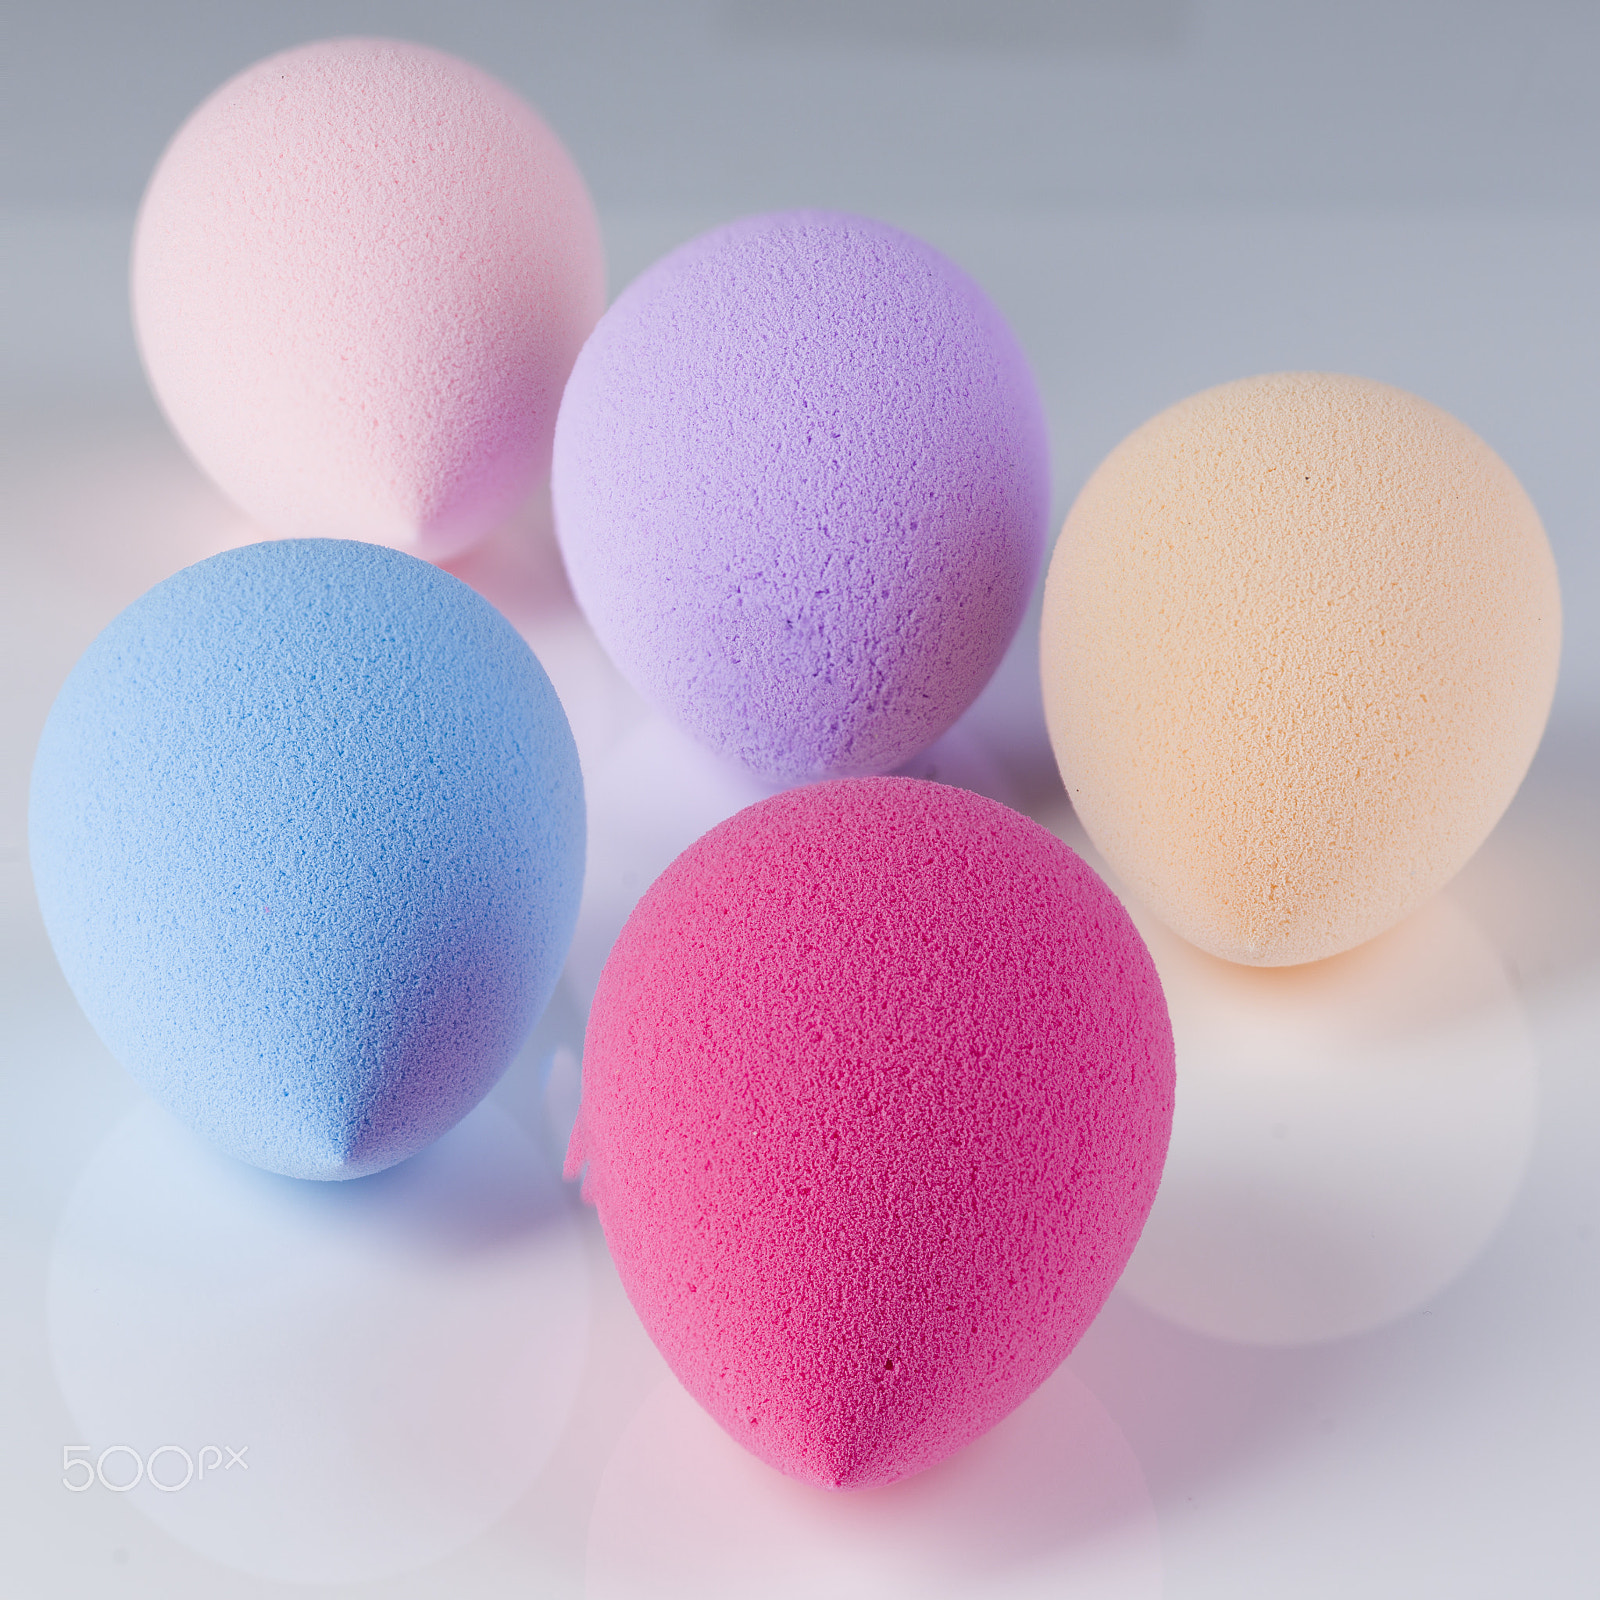 Hasselblad H4D-40 sample photo. Pastel puffs photography